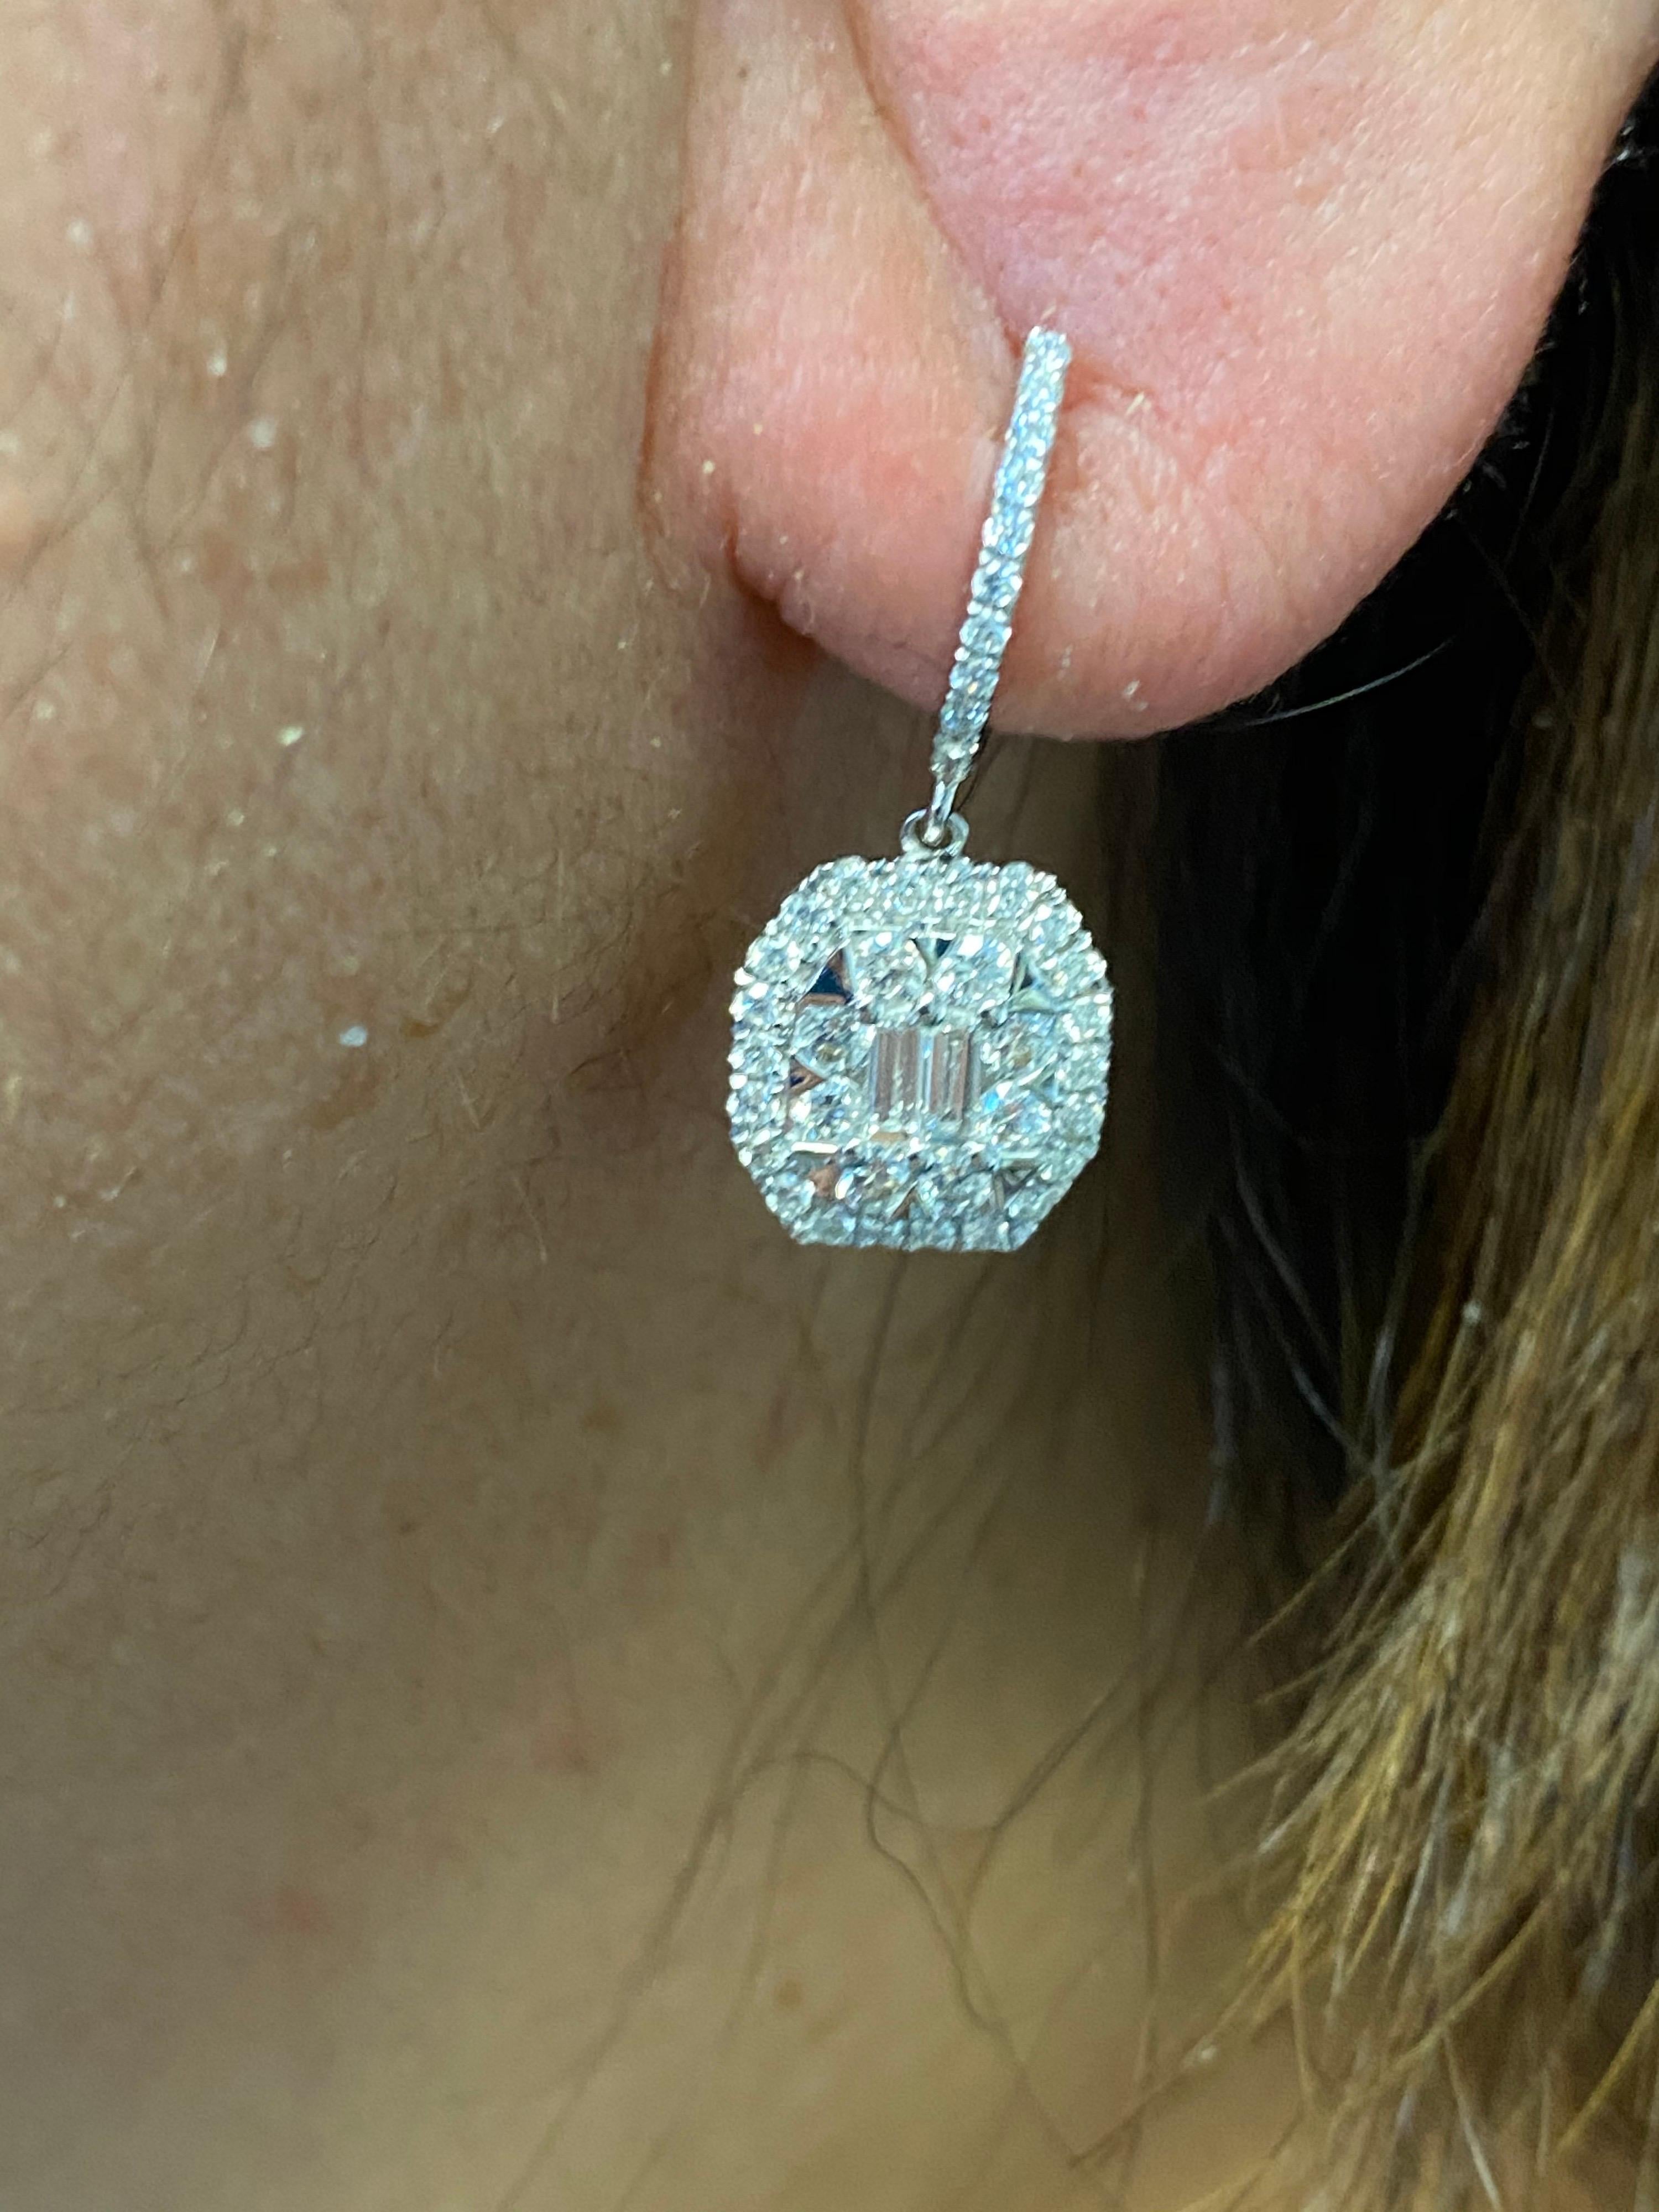 Drop diamond emerald cut illusion setting earrings set in 18K white gold. The pair is set with baguette and round diamonds. The total carat weight is 1.54 carats. The color of the stones are F, the clarity is VS1.